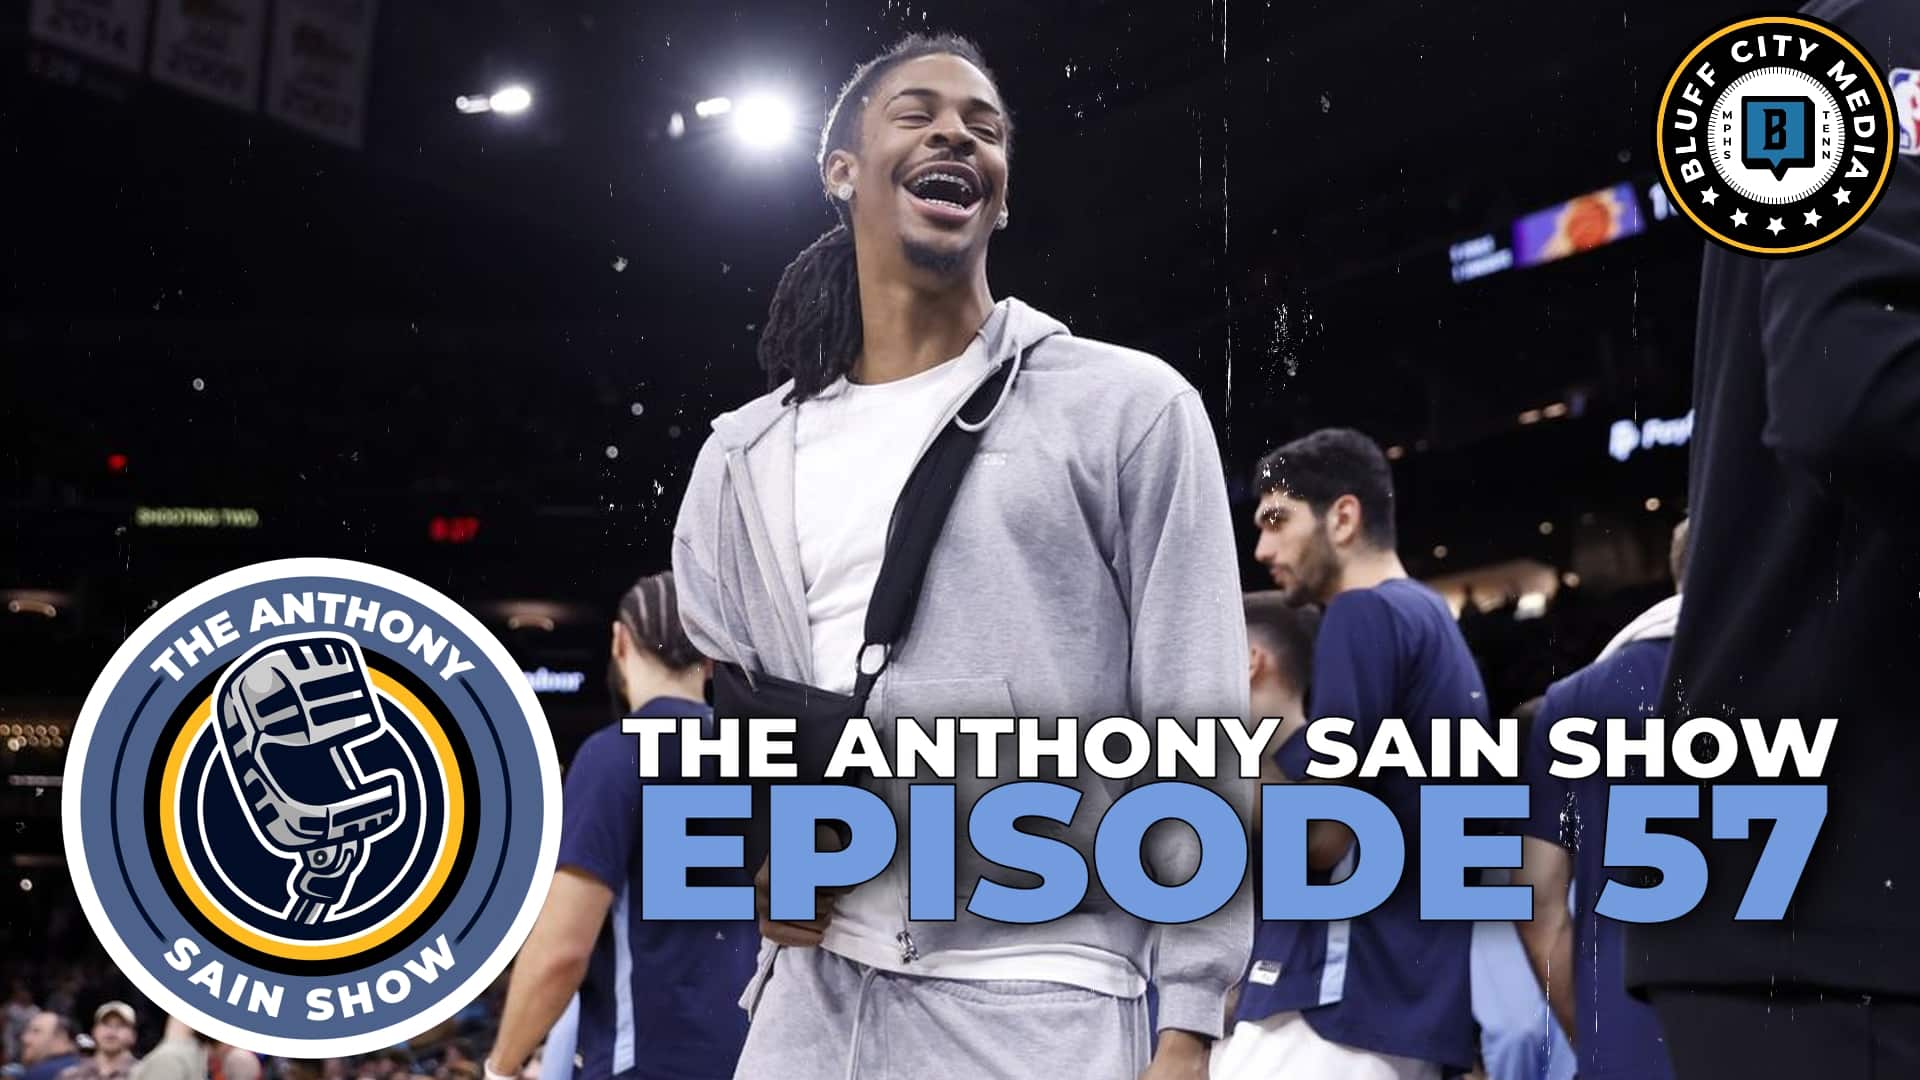 Featured image for “The Anthony Sain Show Ep 57: Ja Morant’s Injury; How Will the Front Office React? Tiger Basketball”